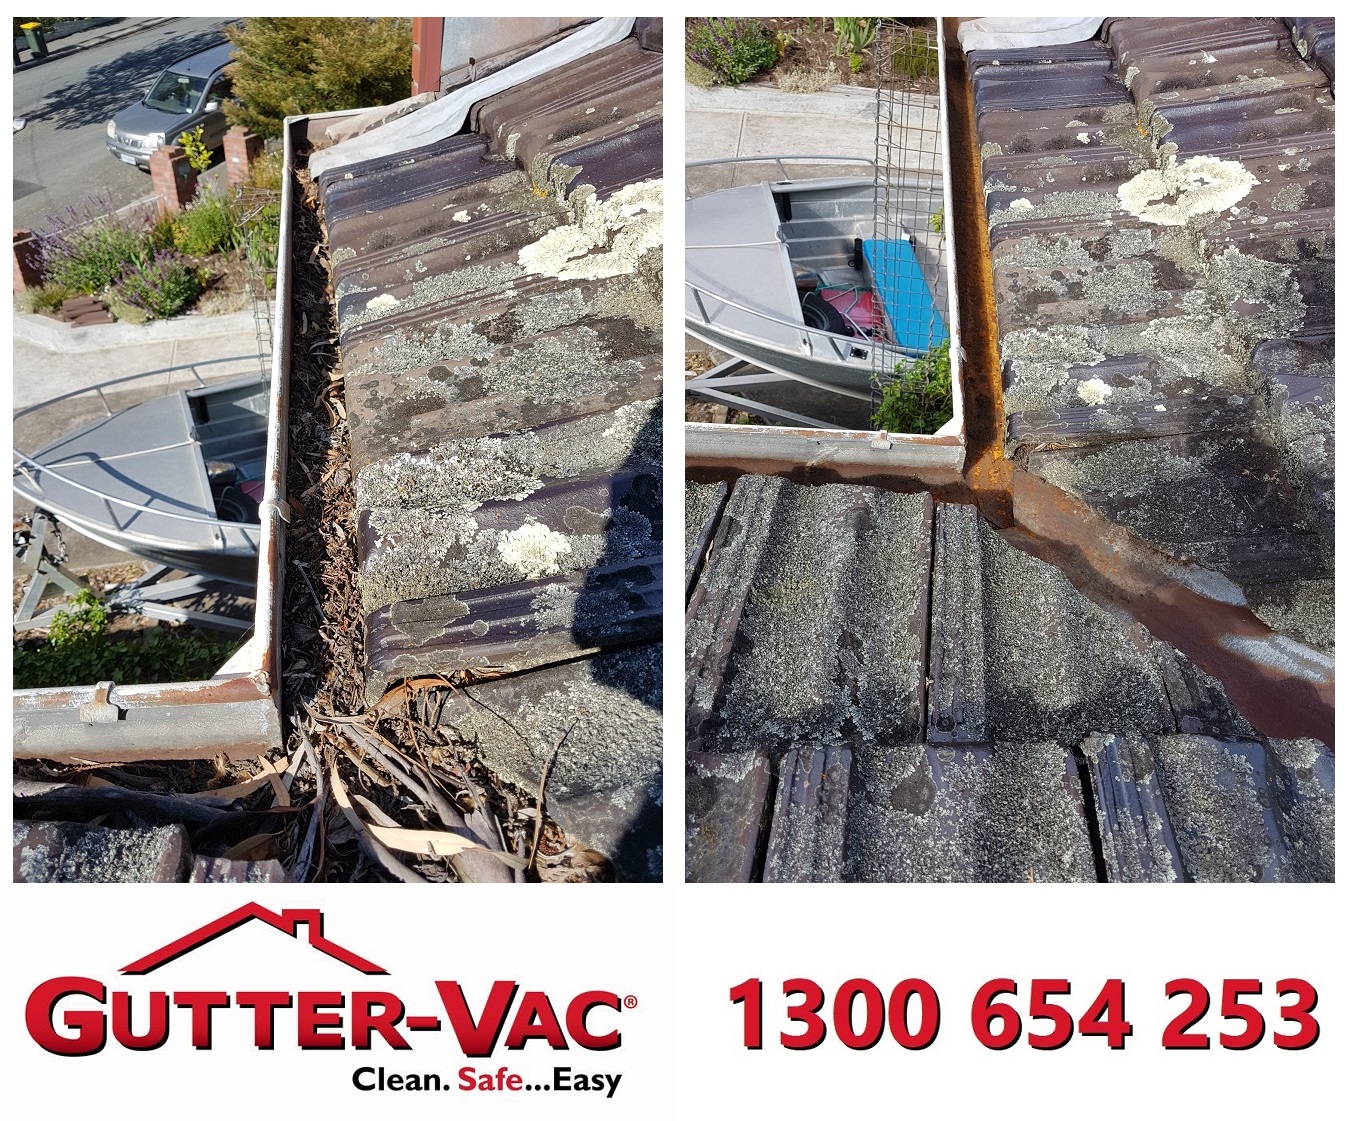 Check Out What We Found at This South Hobart Gutter Clean